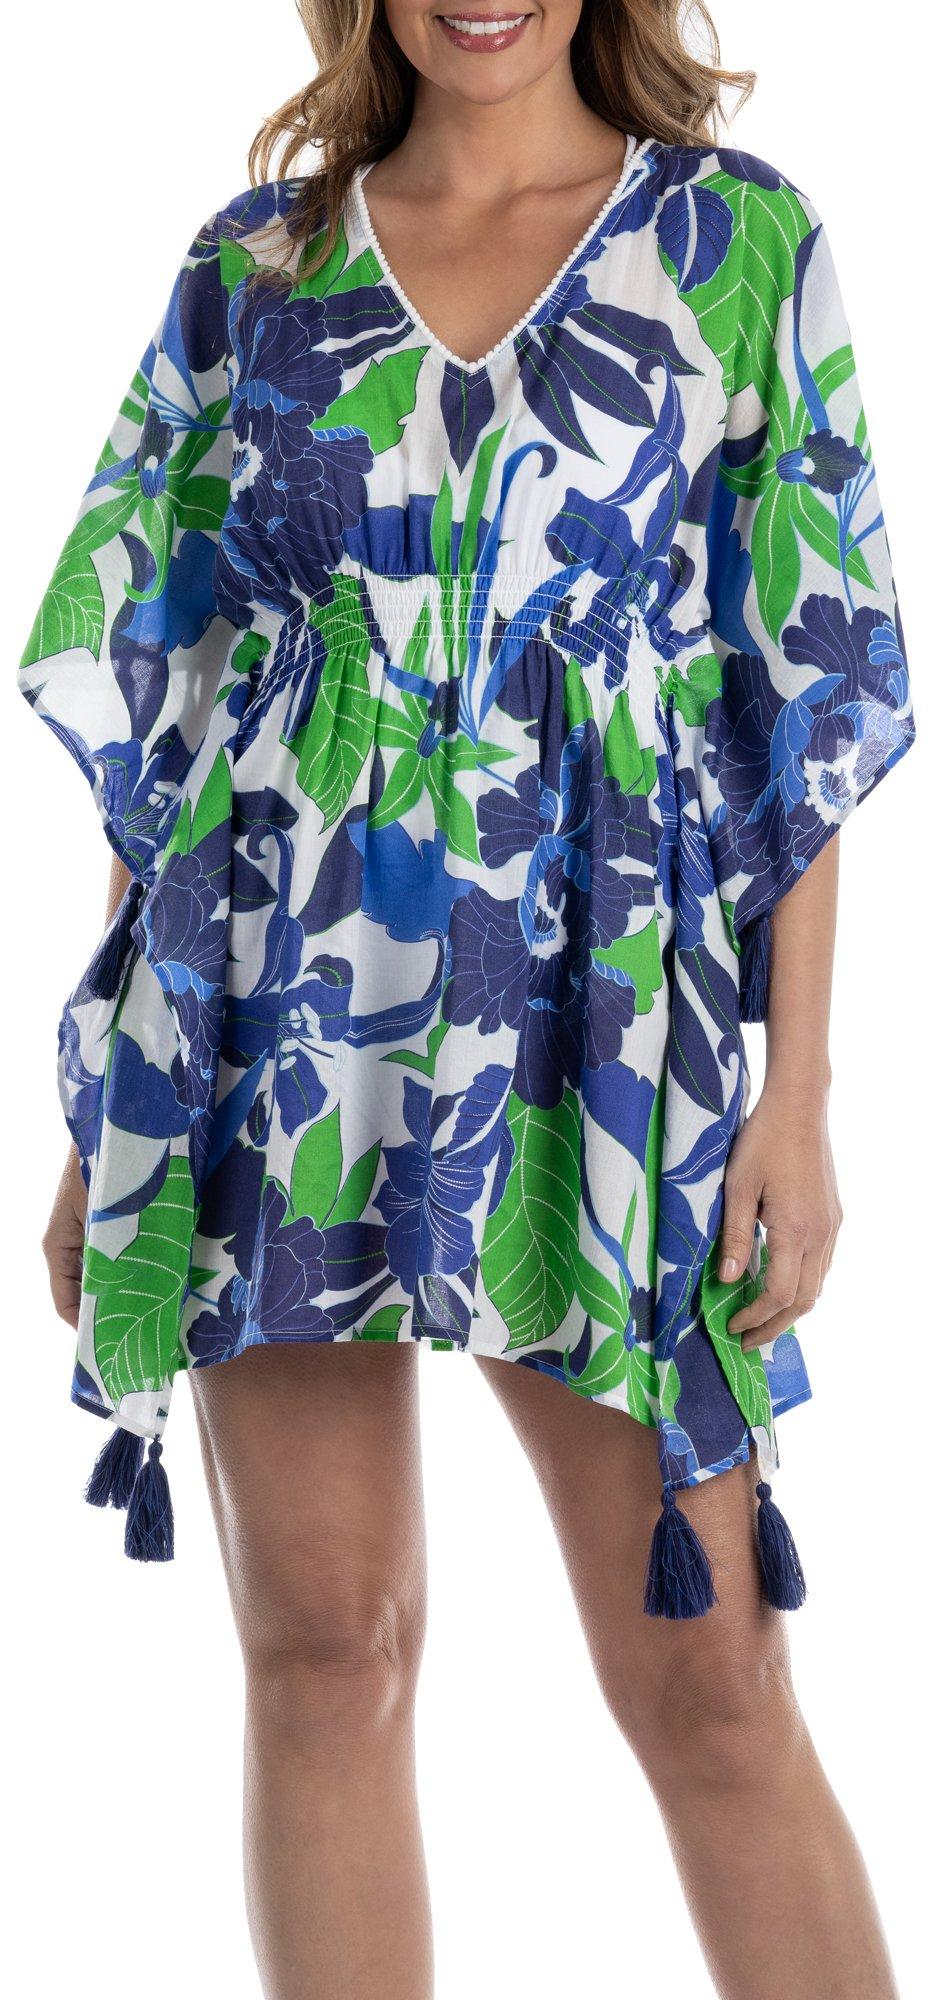 Womens Floral Flowy Coverup